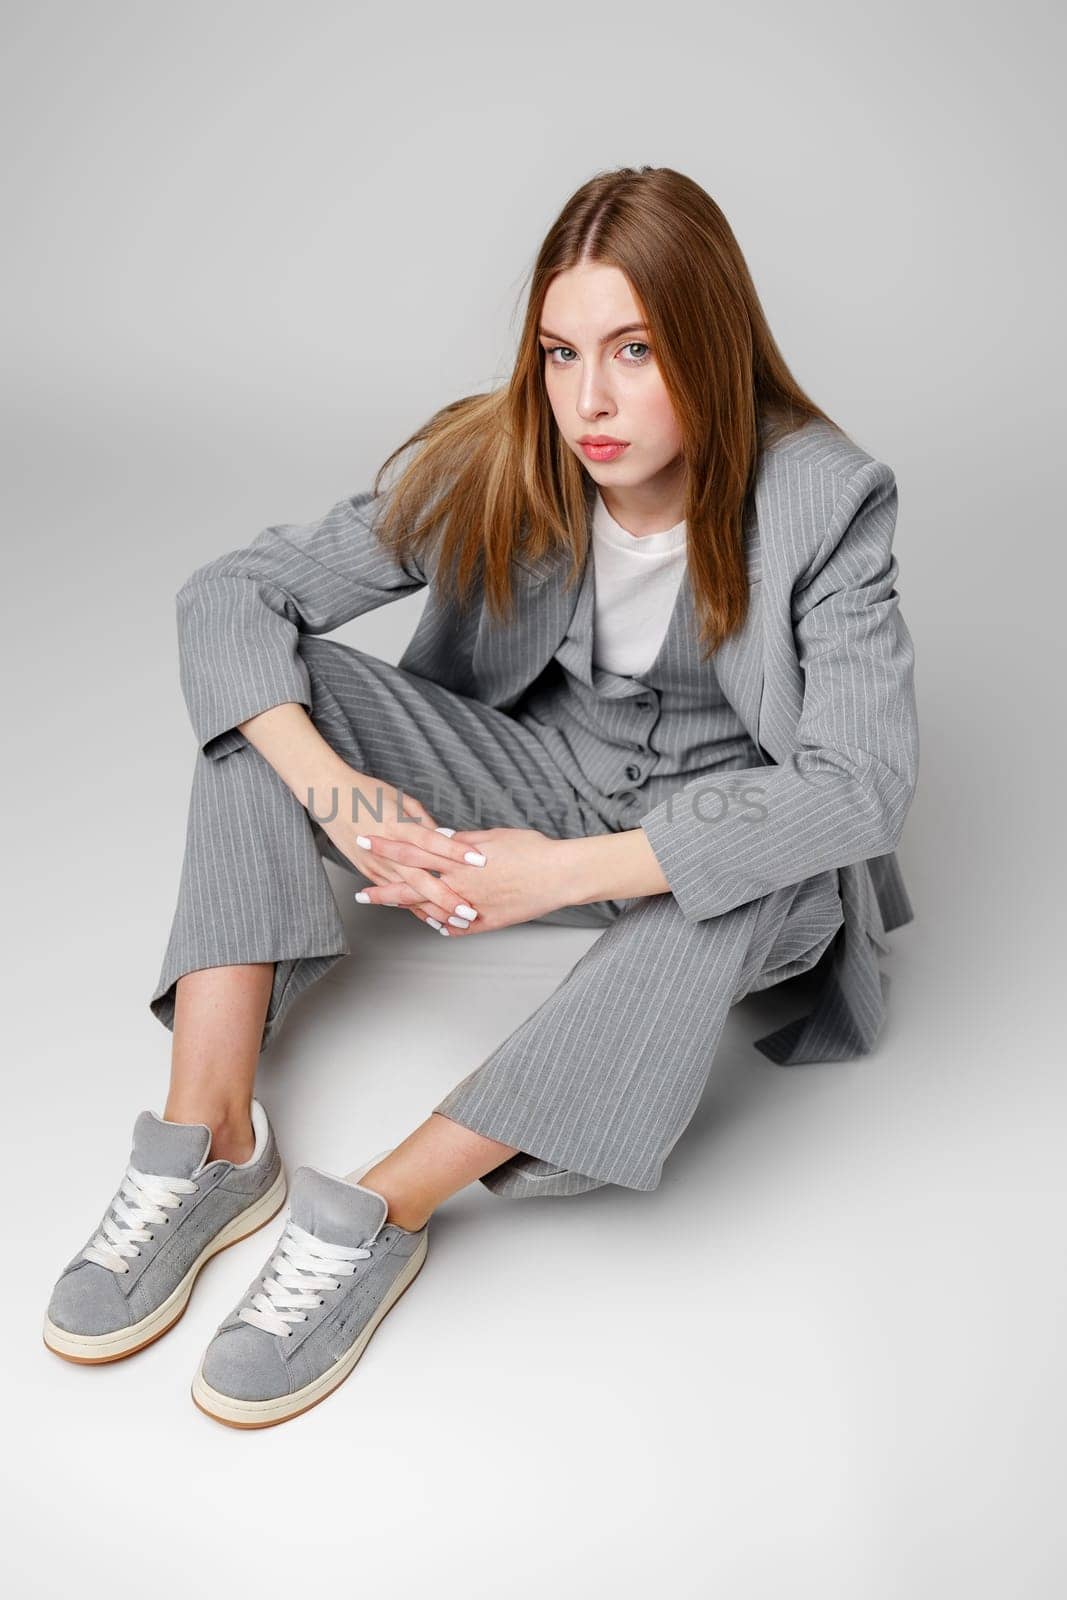 Young Woman in a Gray Suit Sitting on the Floor in Studio portrait